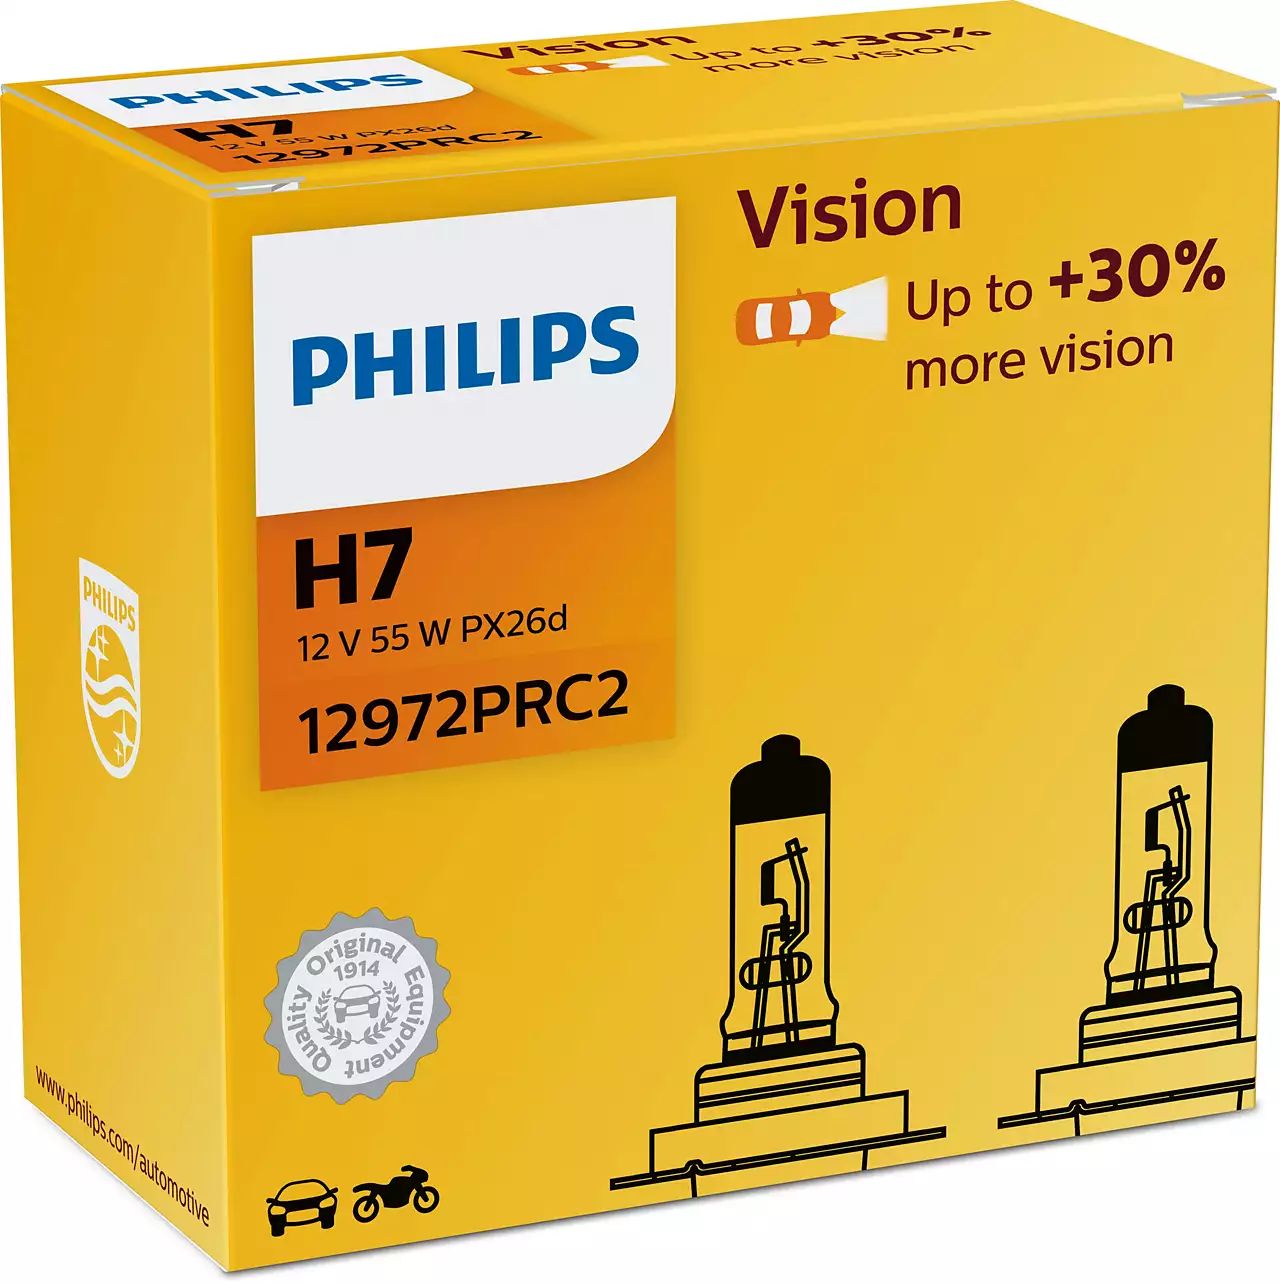 H7 12V 55W PX26d Vision +30% 2 St. Philips - Auto-Lamp Berlin